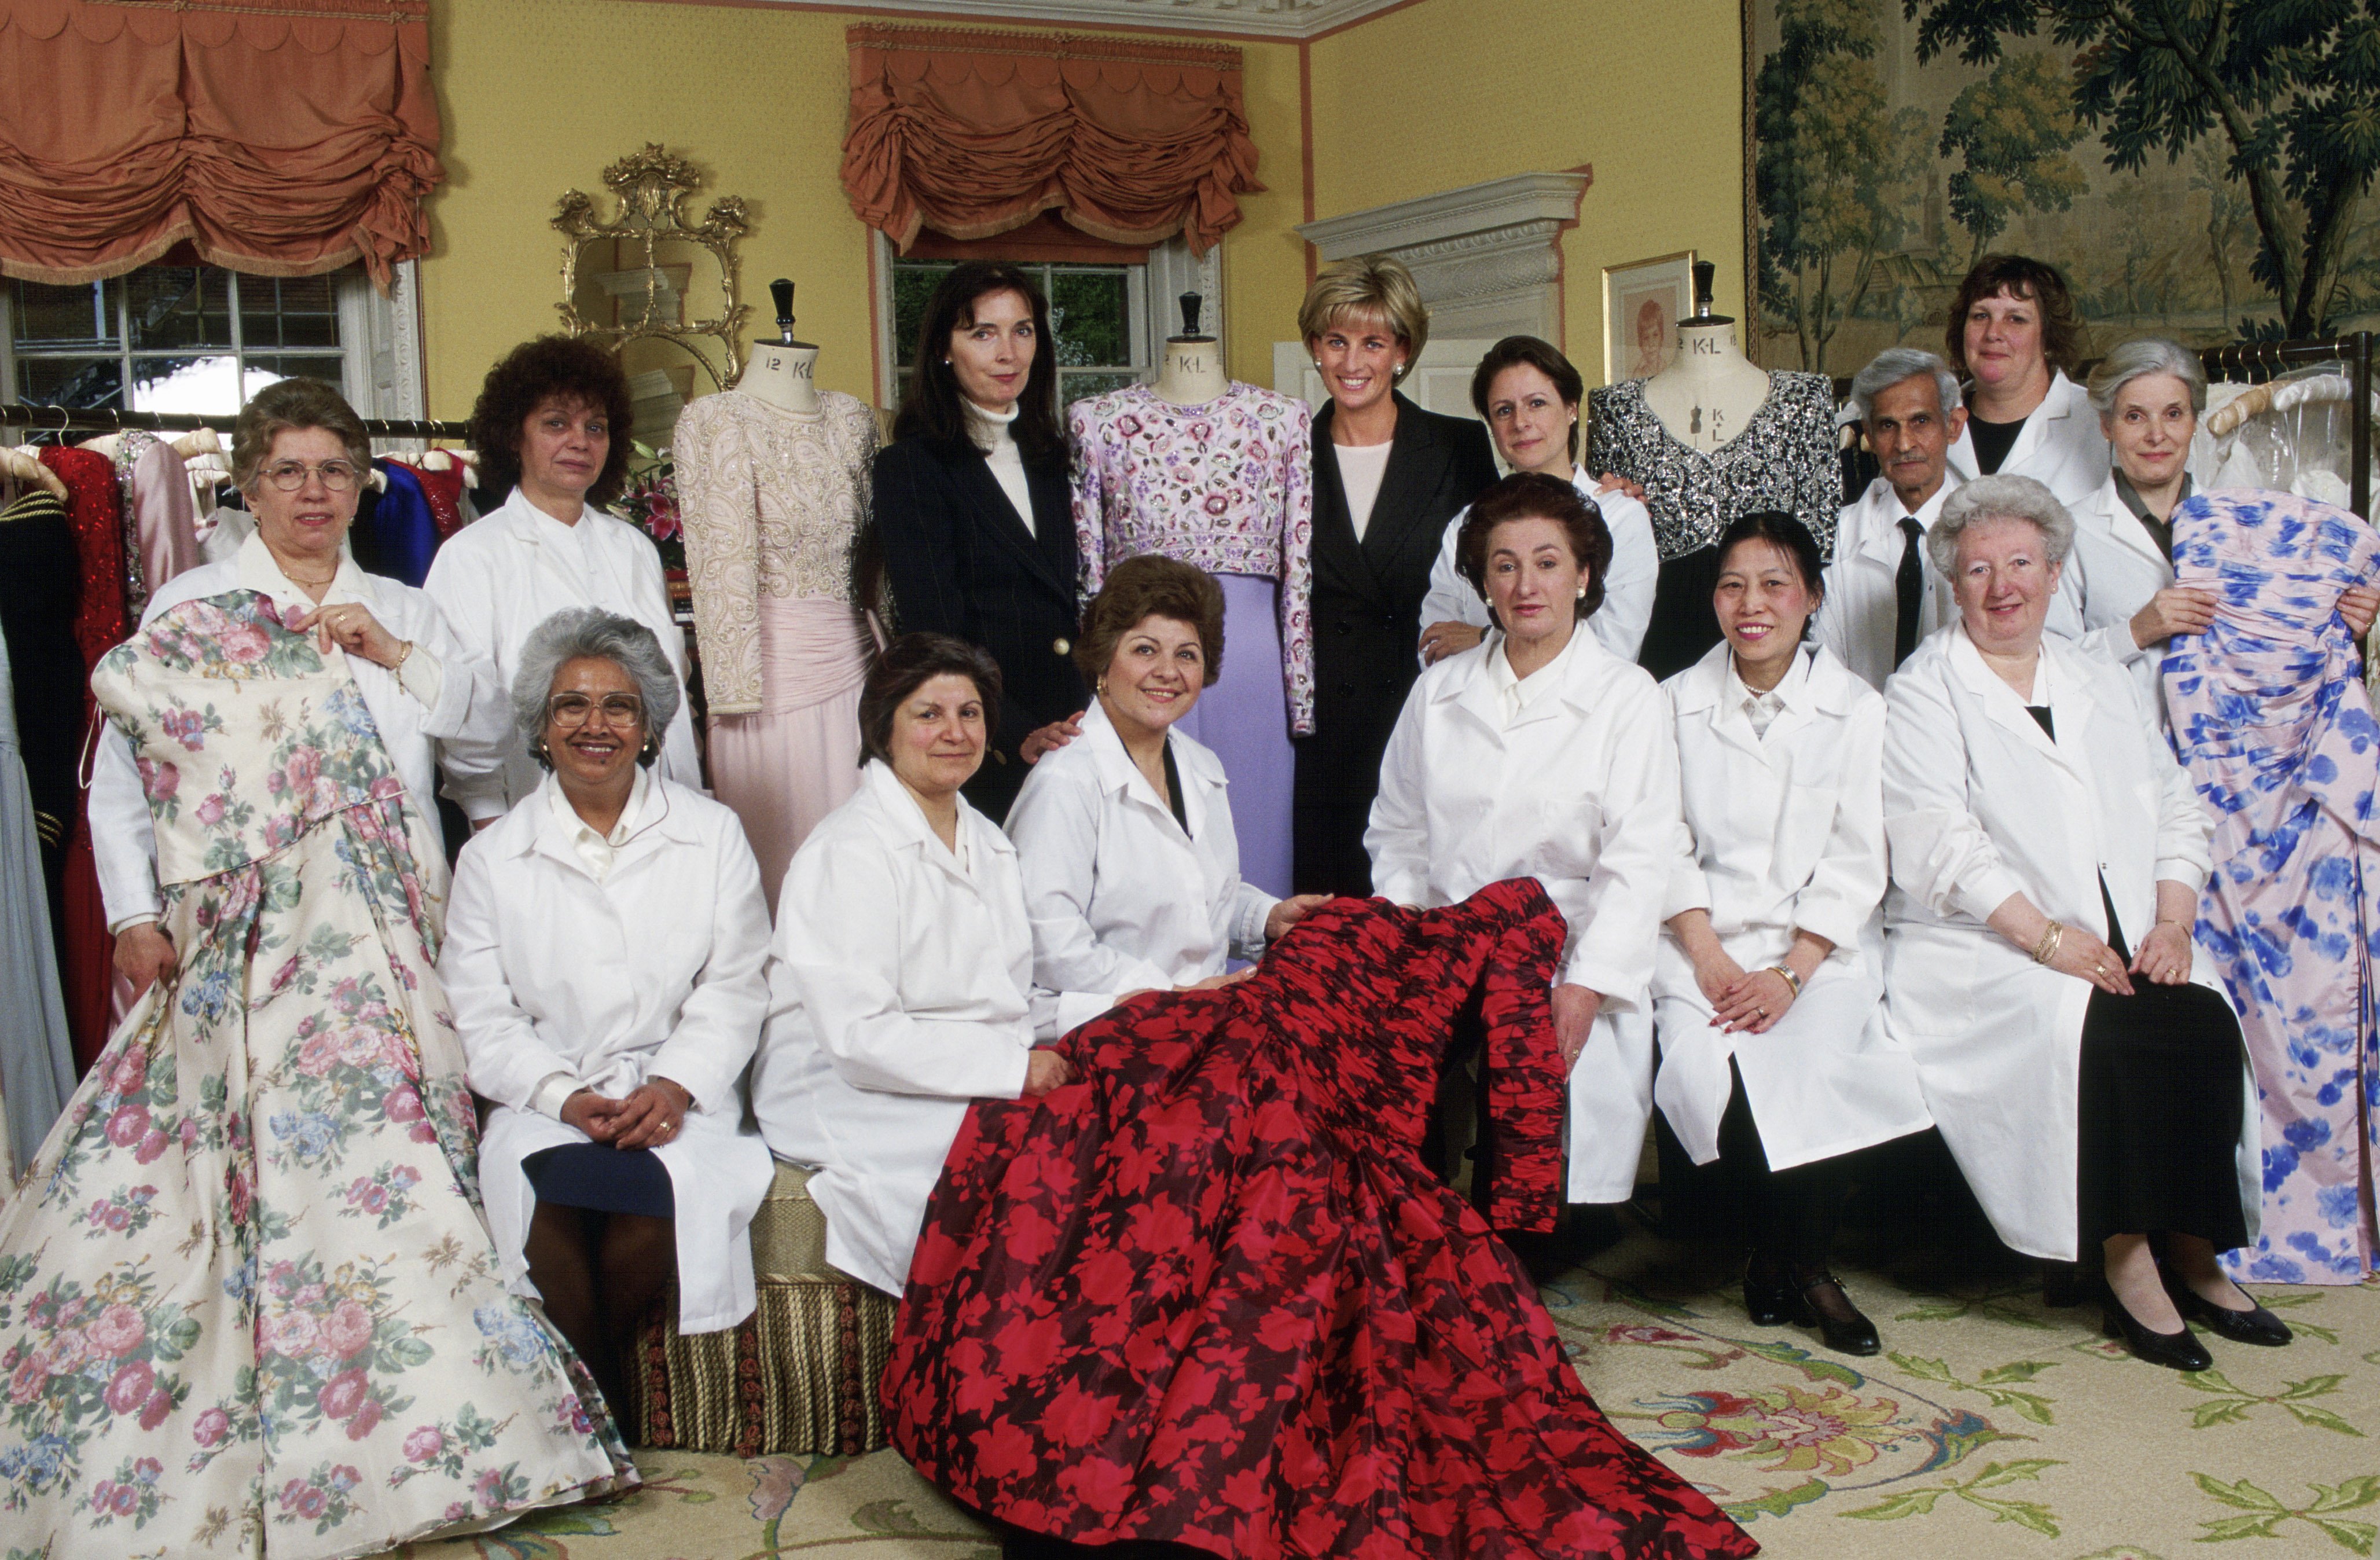 Princess Diana at her home in Kensington Palace with dress designer Catherine Walker and her team of dressmakers called 'petits Mains' | Photo: Getty Images